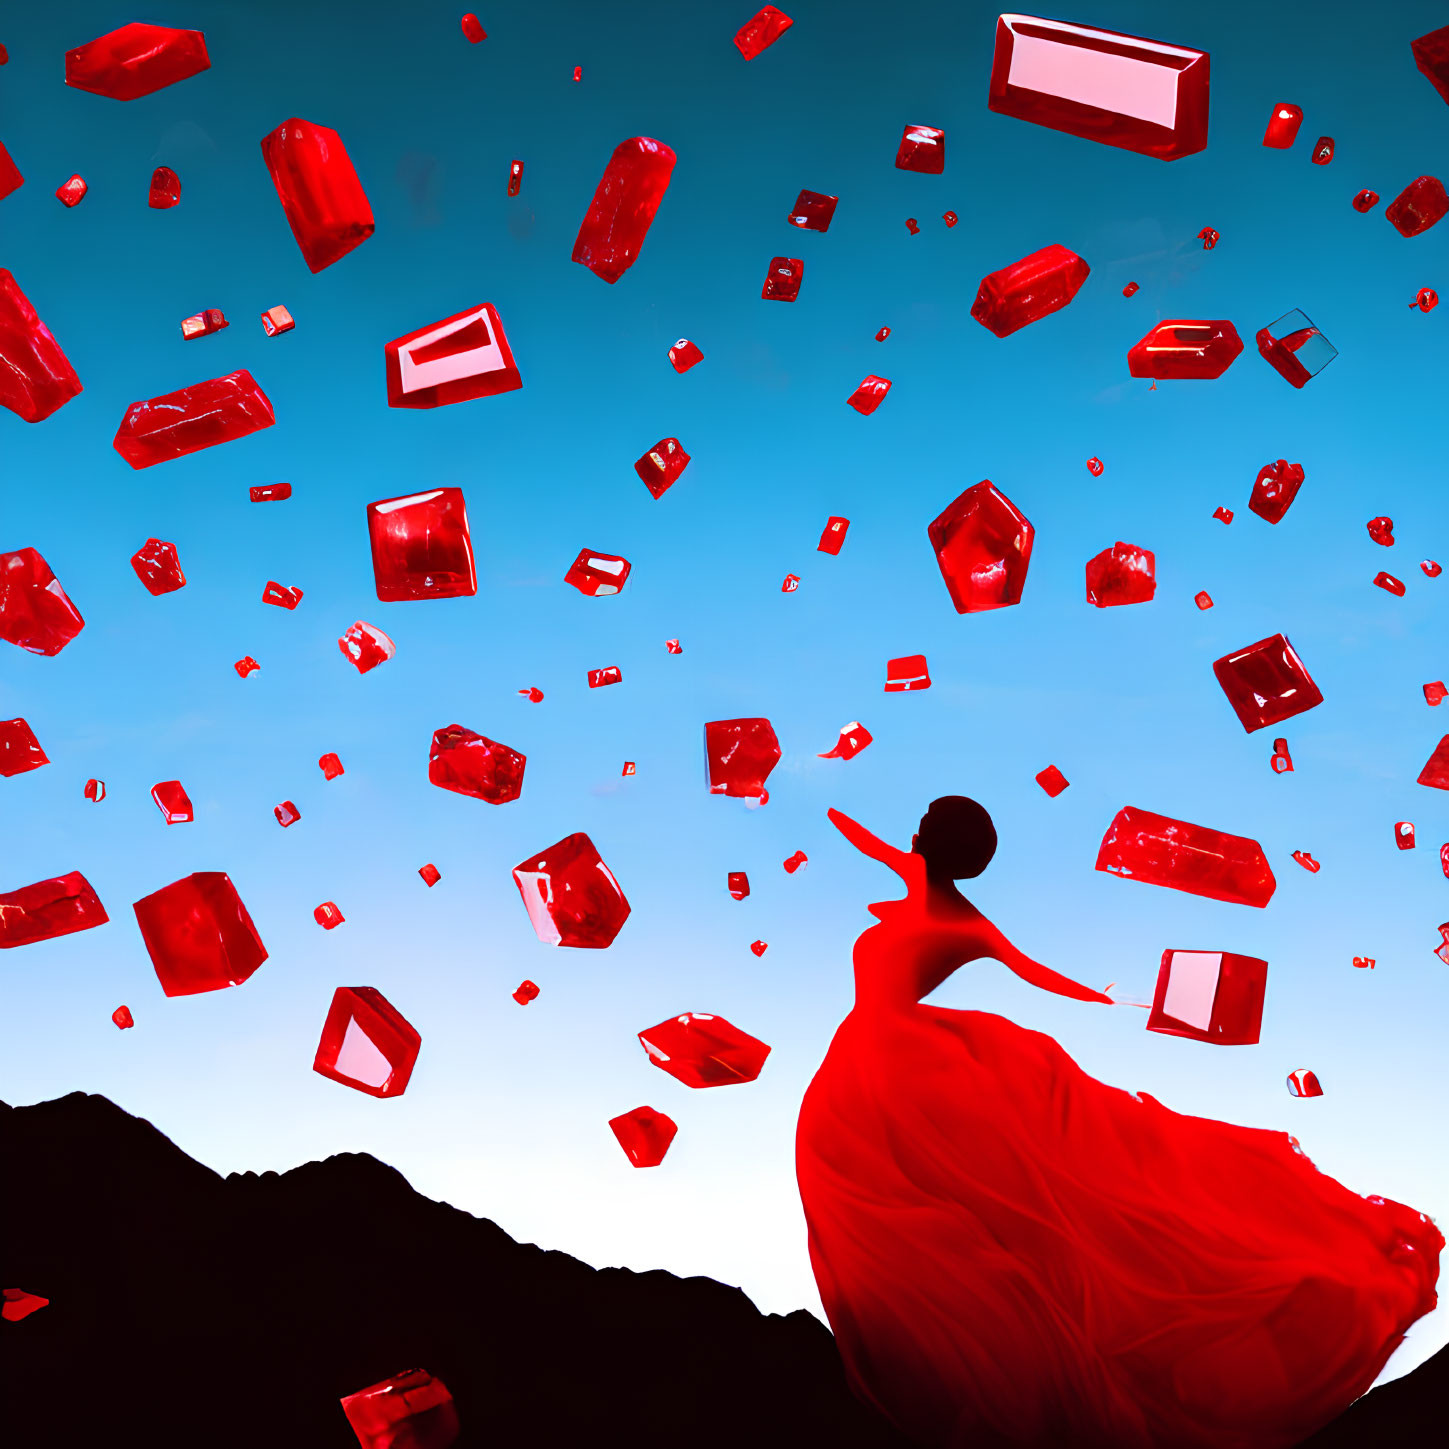 Woman in flowing red dress surrounded by floating red crystals at twilight